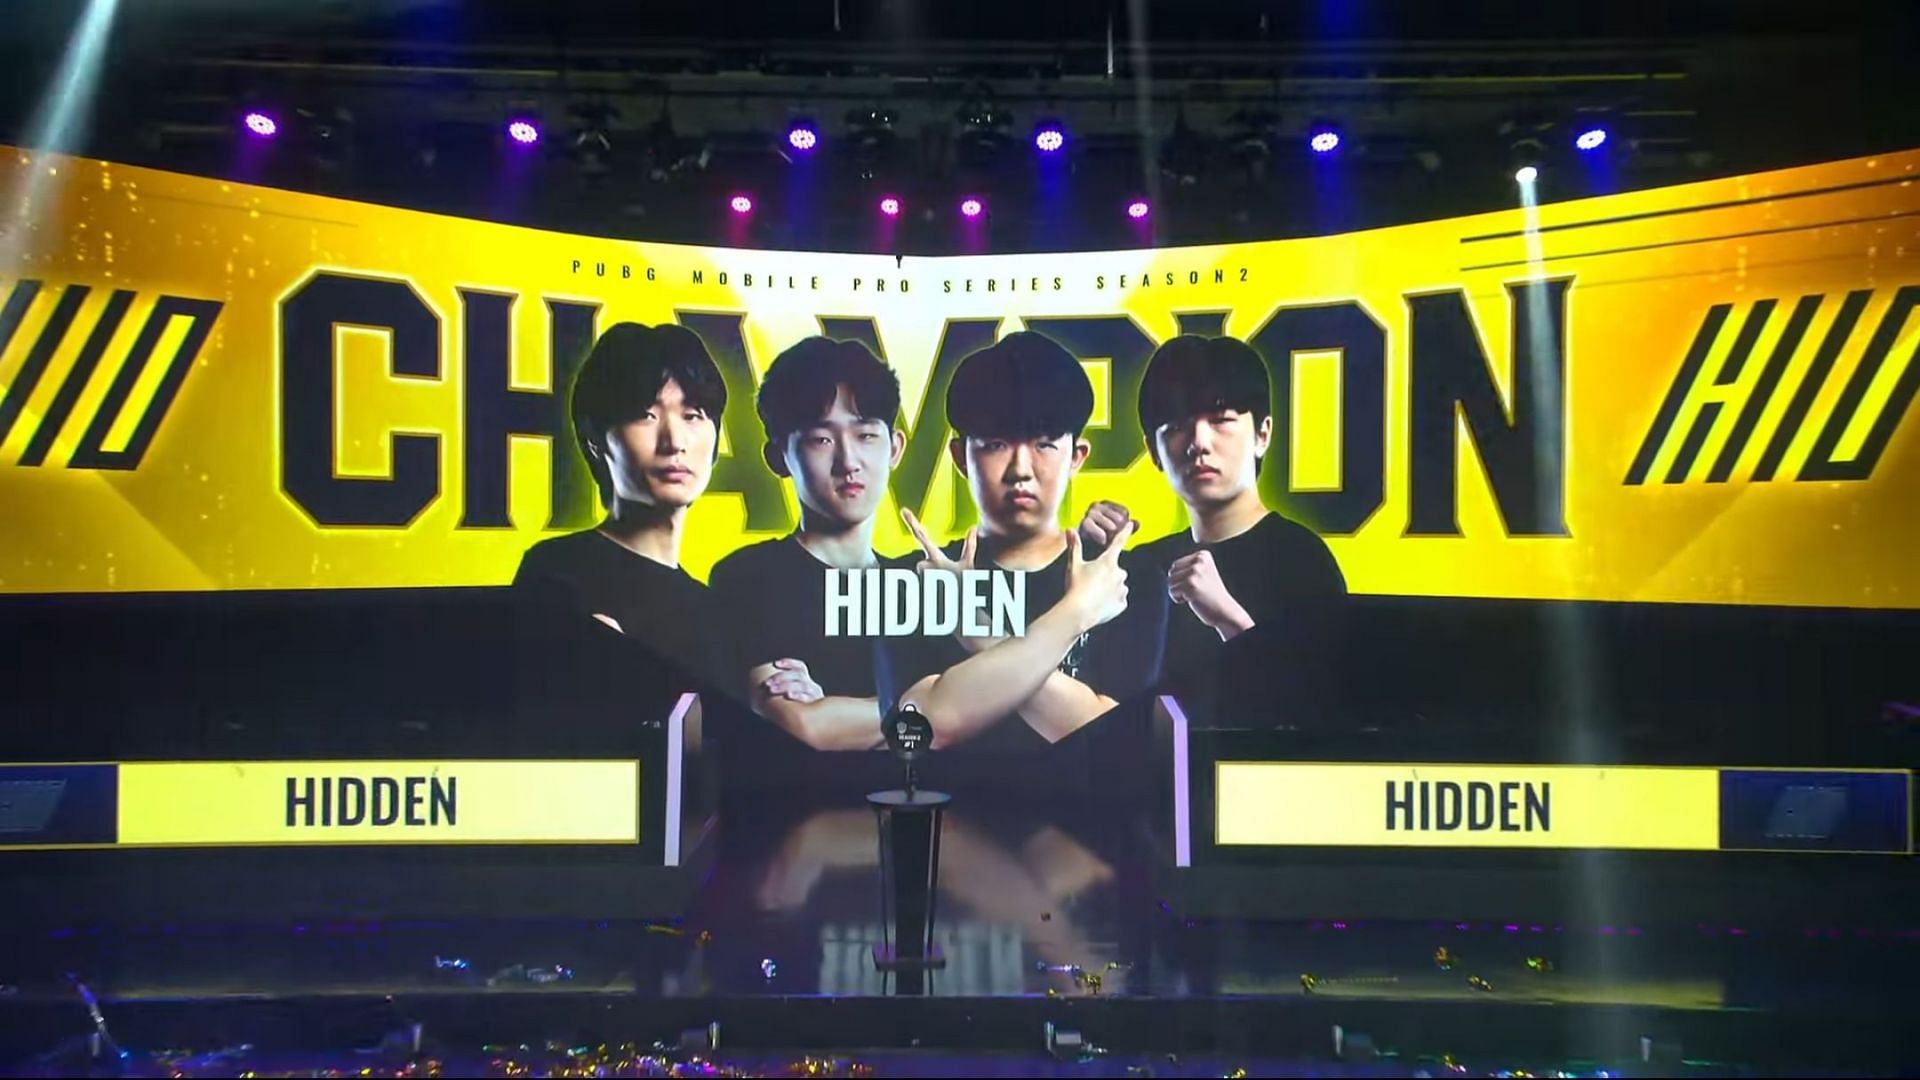 Hidden were the crowned champions of PUBG Mobile Pro Series Season 2